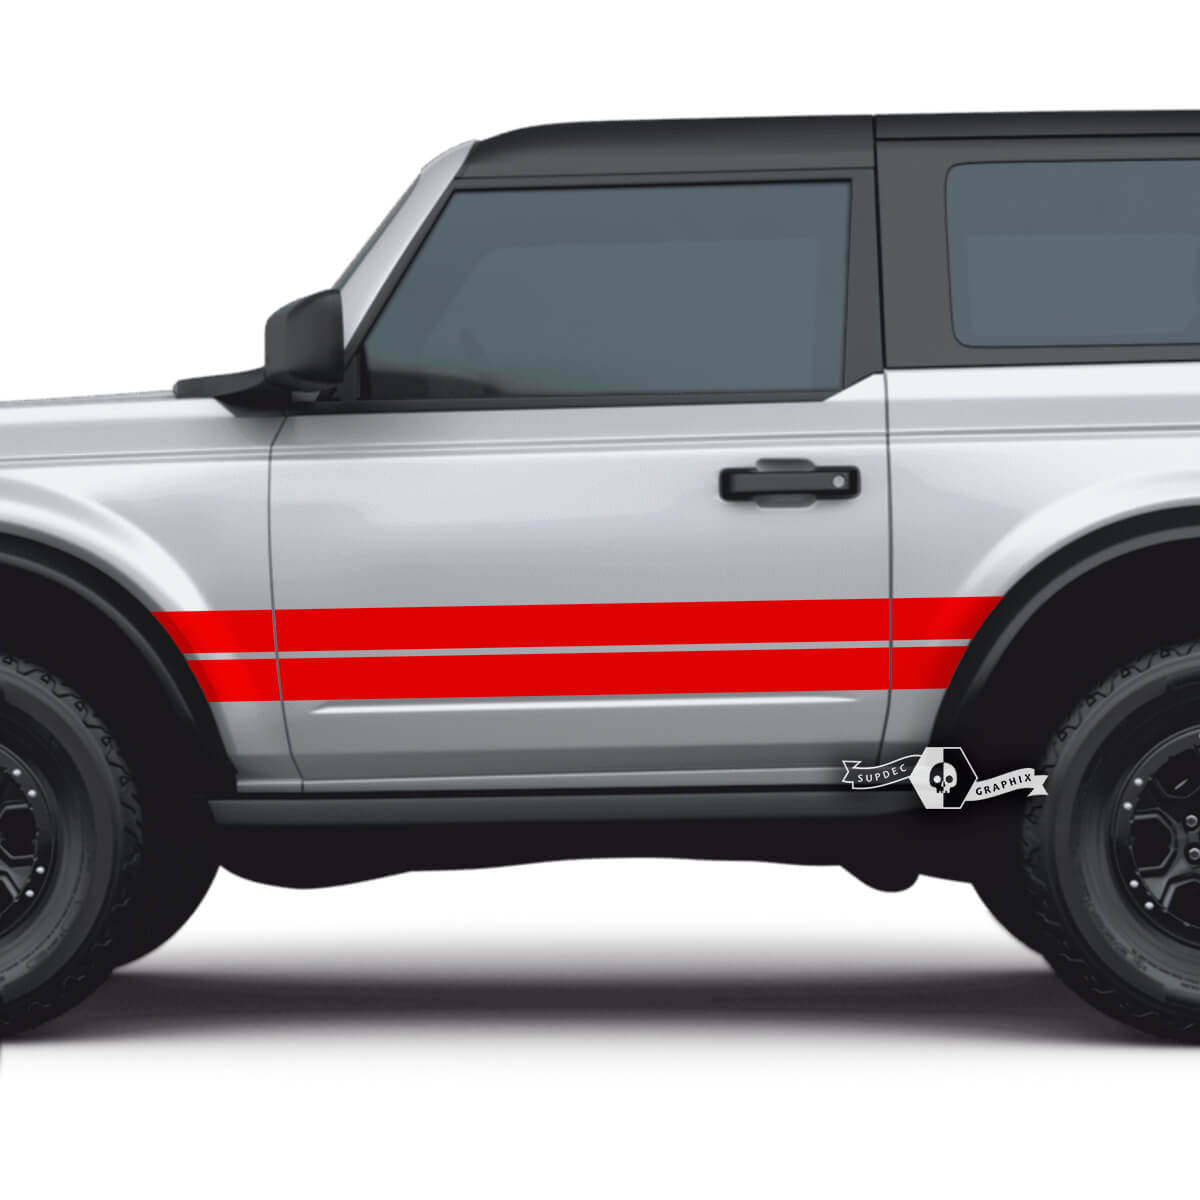 Pair of 2 Doors Ford Bronco Side Stripes Decals Stickers for Ford Bronco
